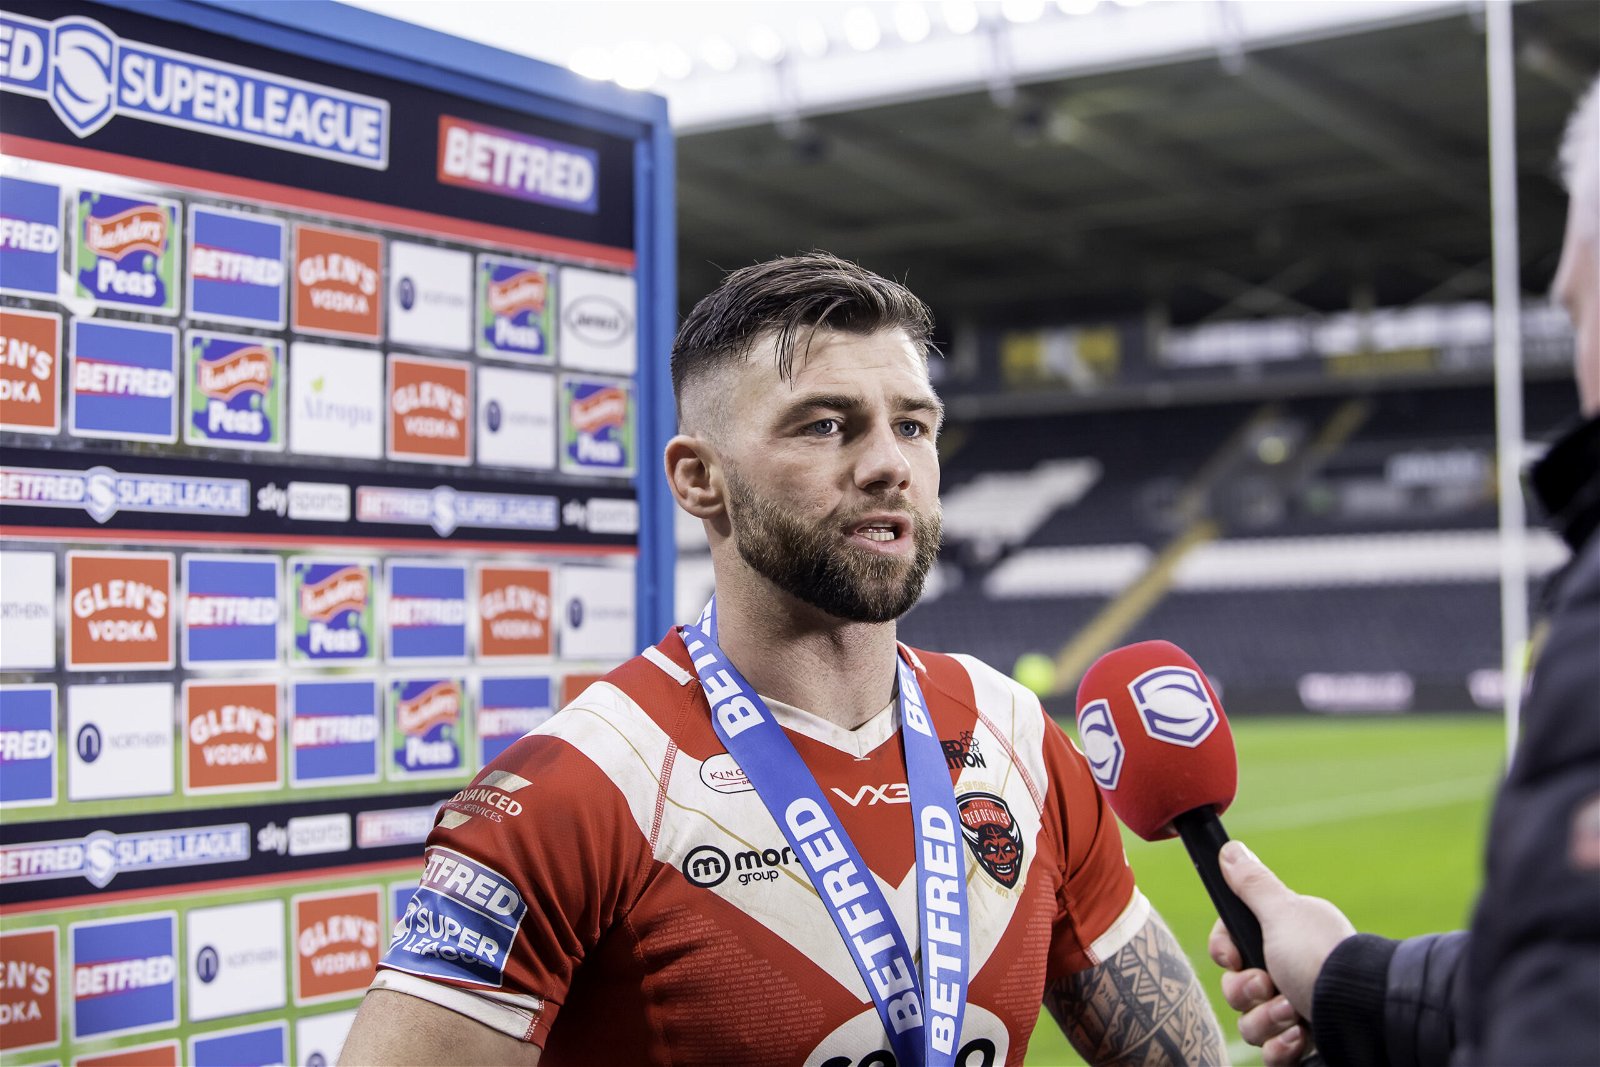 Losing talisman Andy Ackers as well as ex-Man of Steel Brodie Croft and their two starting wingers means Salford Red Devils will have to "reinvent themselves" according to Sam Tomkins.